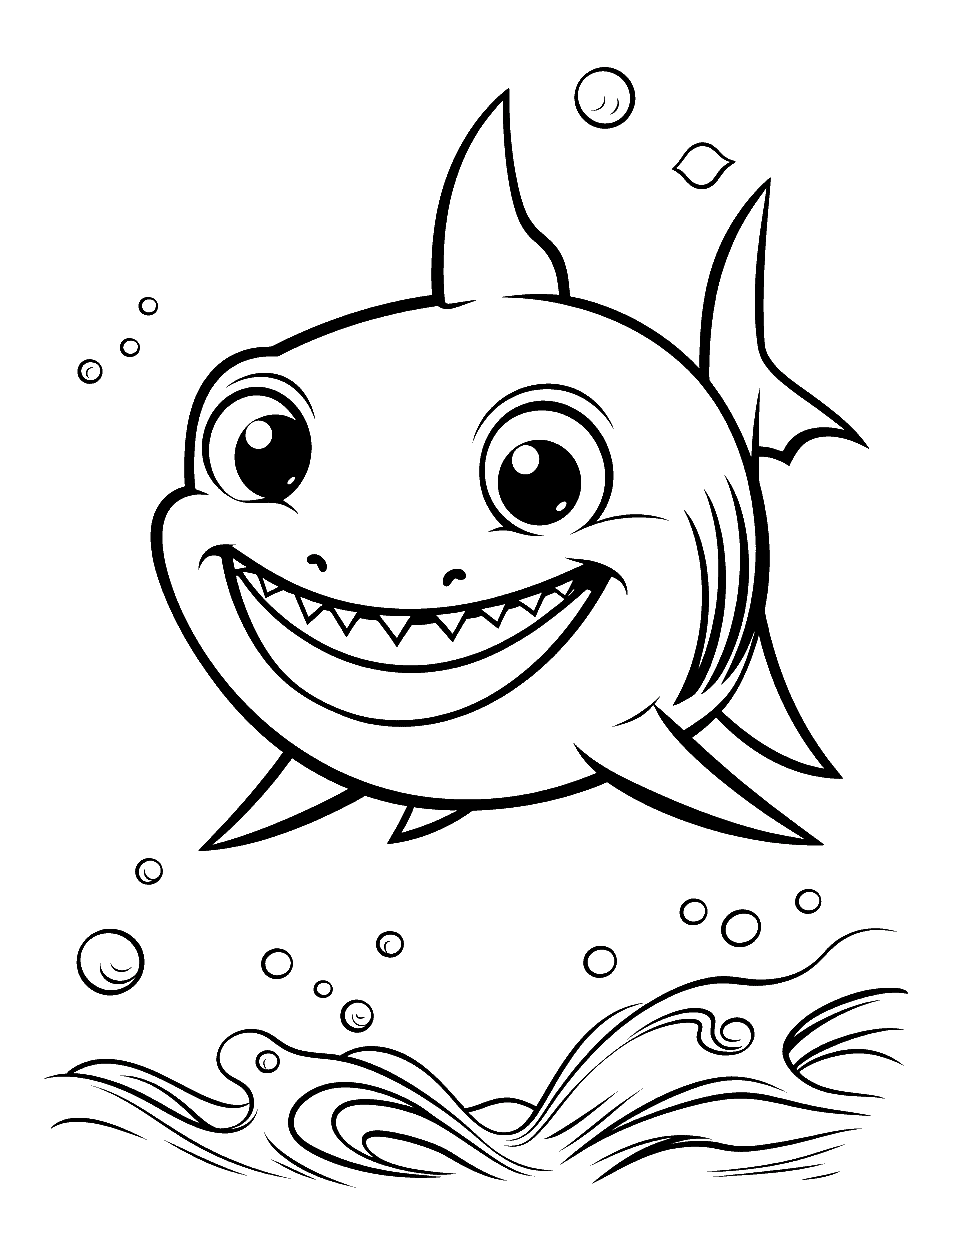 Baby Shark's First Swim Shark Coloring Page - A baby shark swimming for the first time, perfect for younger kids.